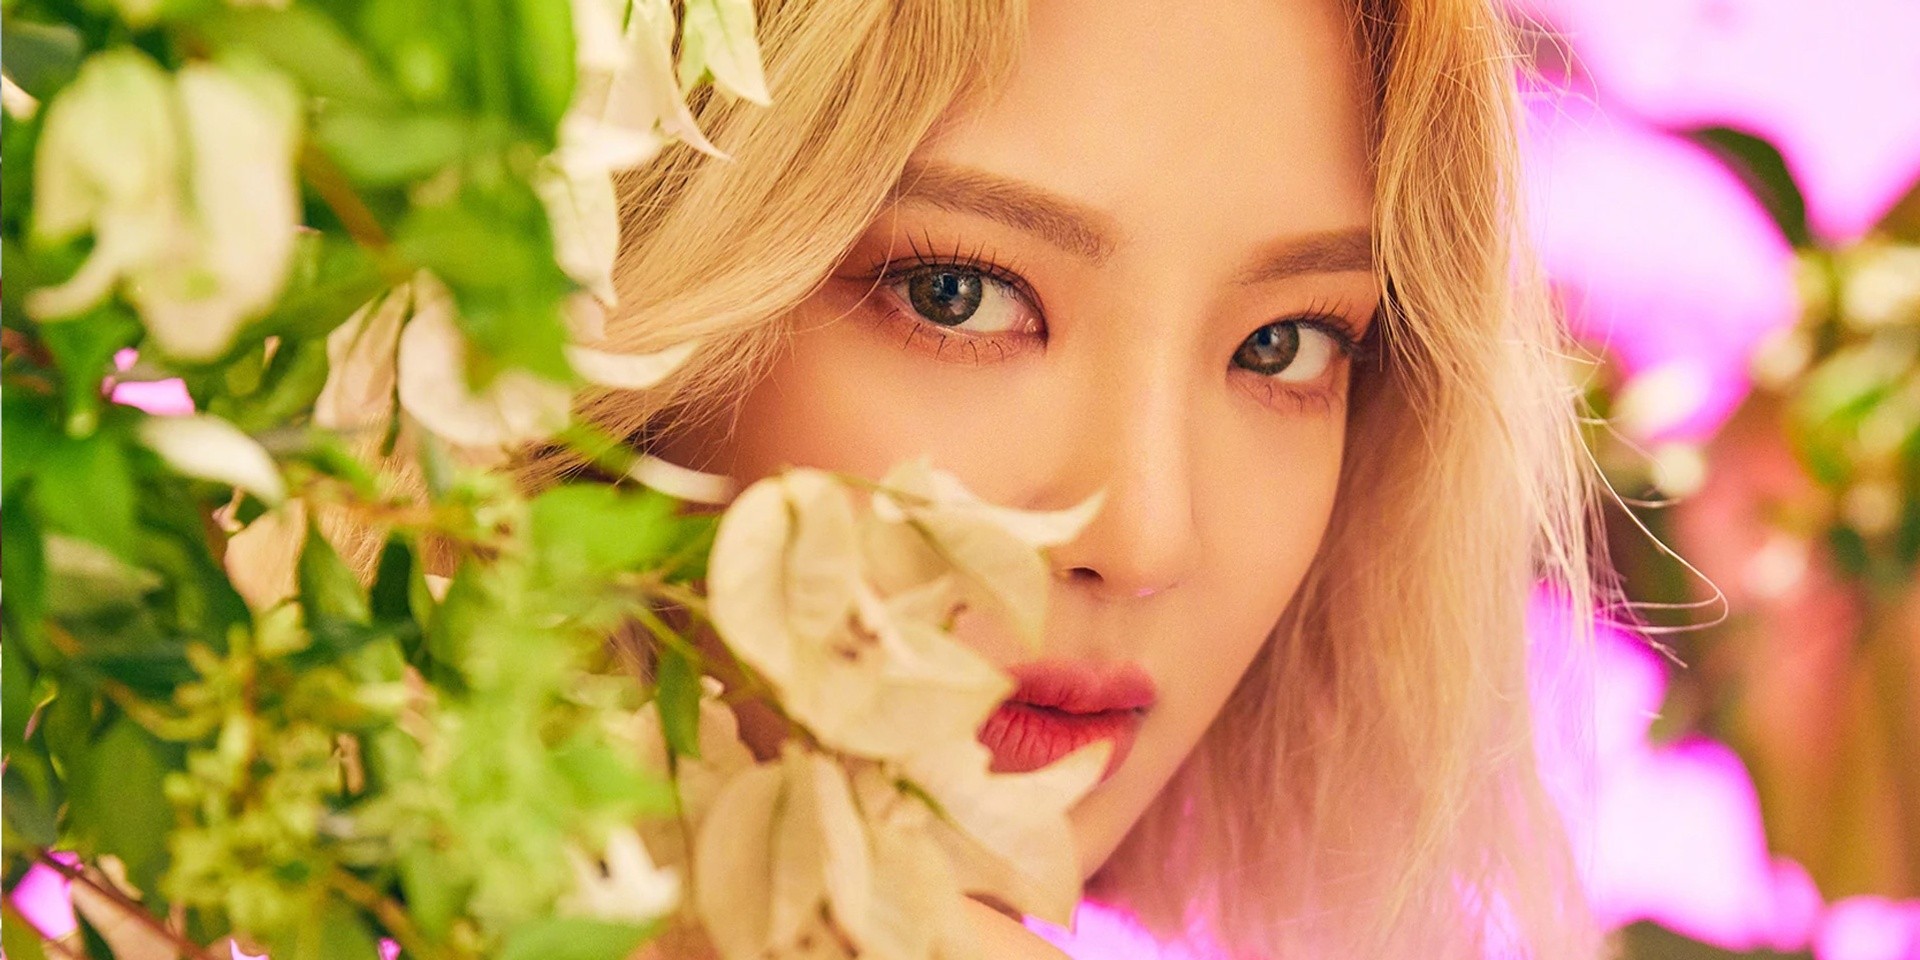 Hyo to perform special DJ set in Manila this February